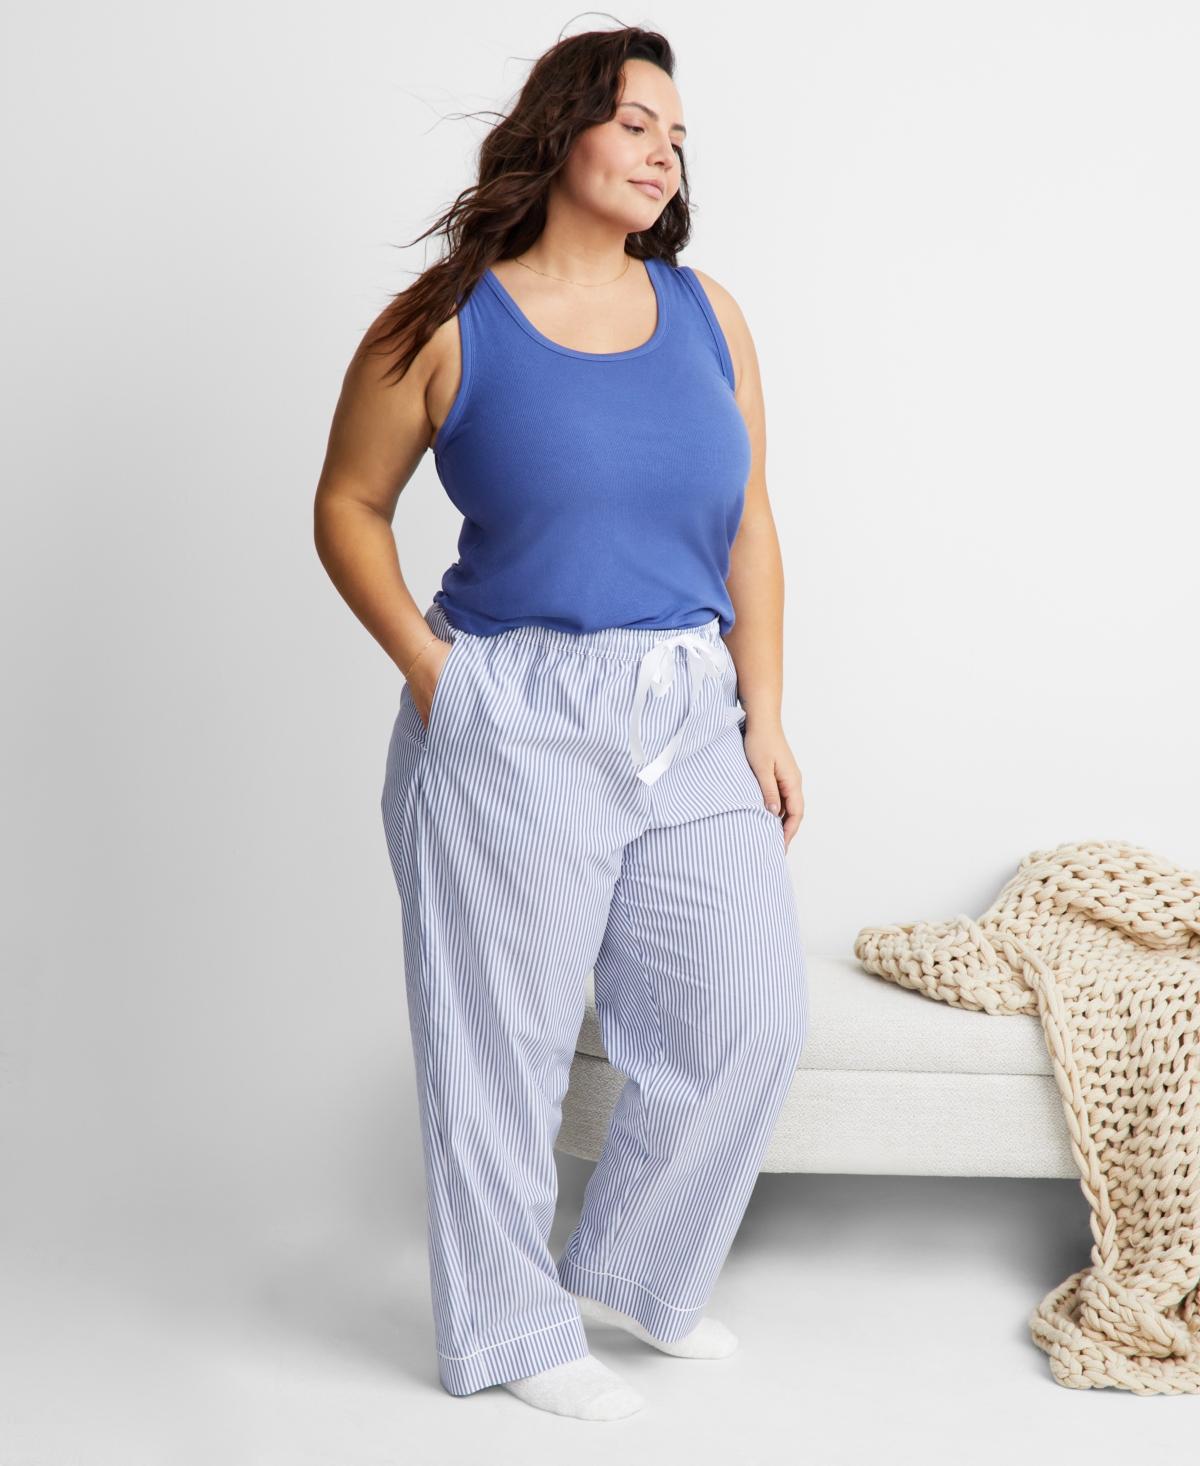 State Of Day Women's Printed Poplin Pajama Pants Xs-3x, Created For Macy's In Blue Stripe